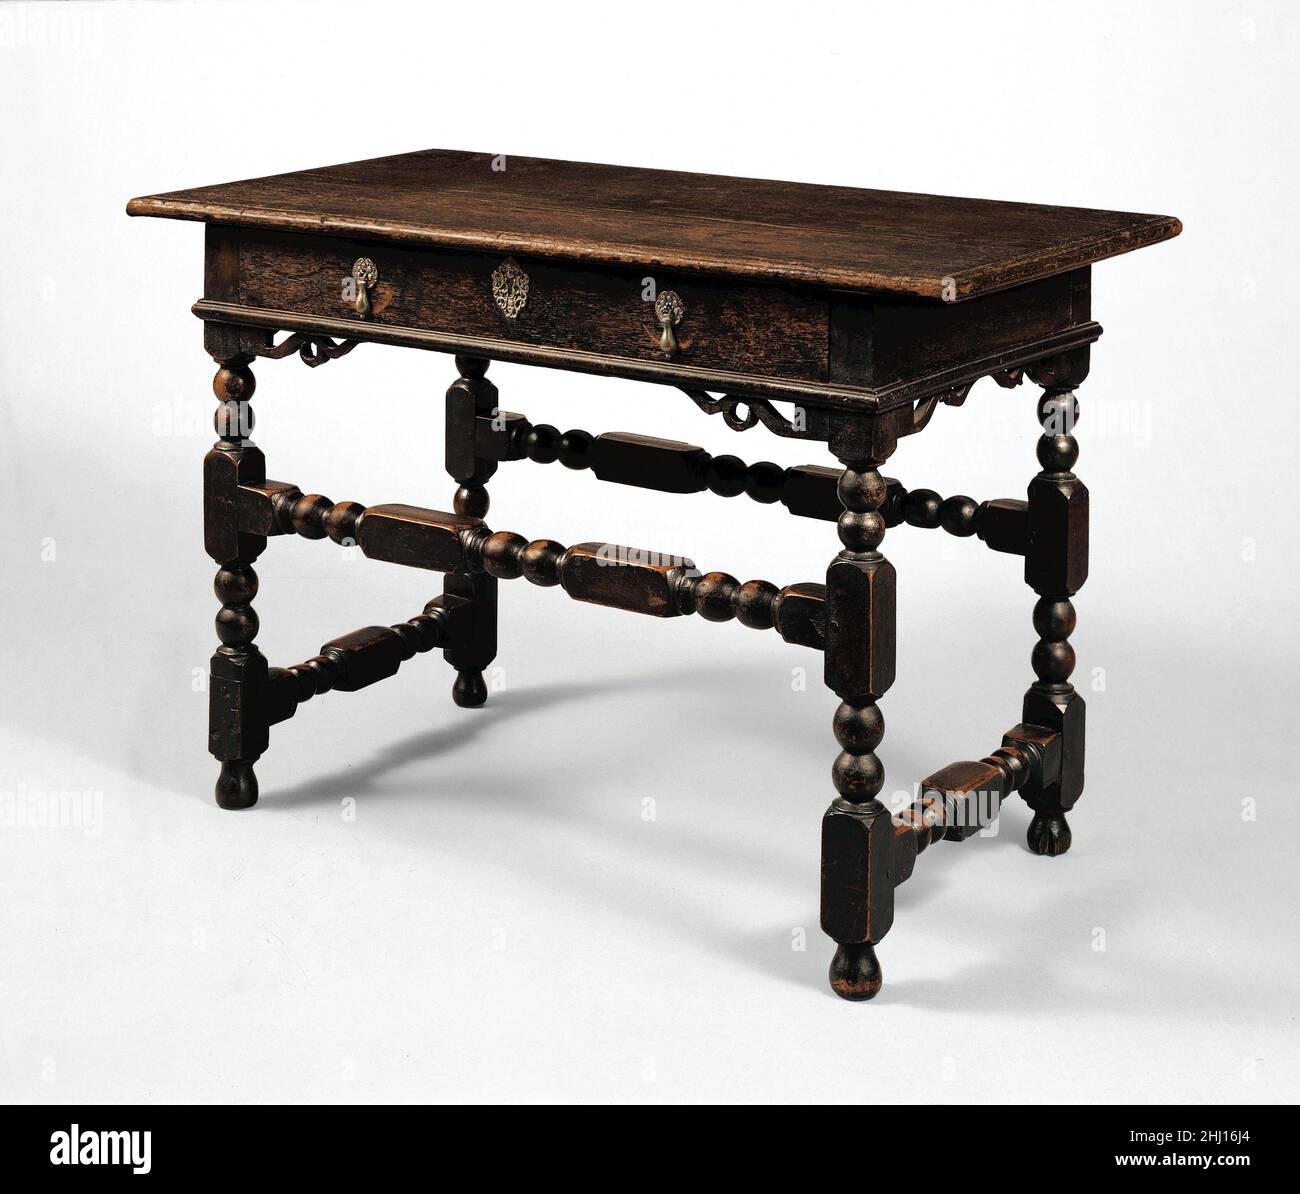 Joined table with drawer 1690–1710 American The turnings of this sophisticated and elegant table mark it as having been made in Boston. The cast-brass hardware on the drawer includes an escutcheon with a cherub’s head—a stylish touch seldom found on American furniture. The table would have been used in a parlor or dining space as a side table and would have been accompanied by similarly turned upholstered chairs, such as the Turkey-work chair (52.77.51). Joined table with drawer  8072 Stock Photo